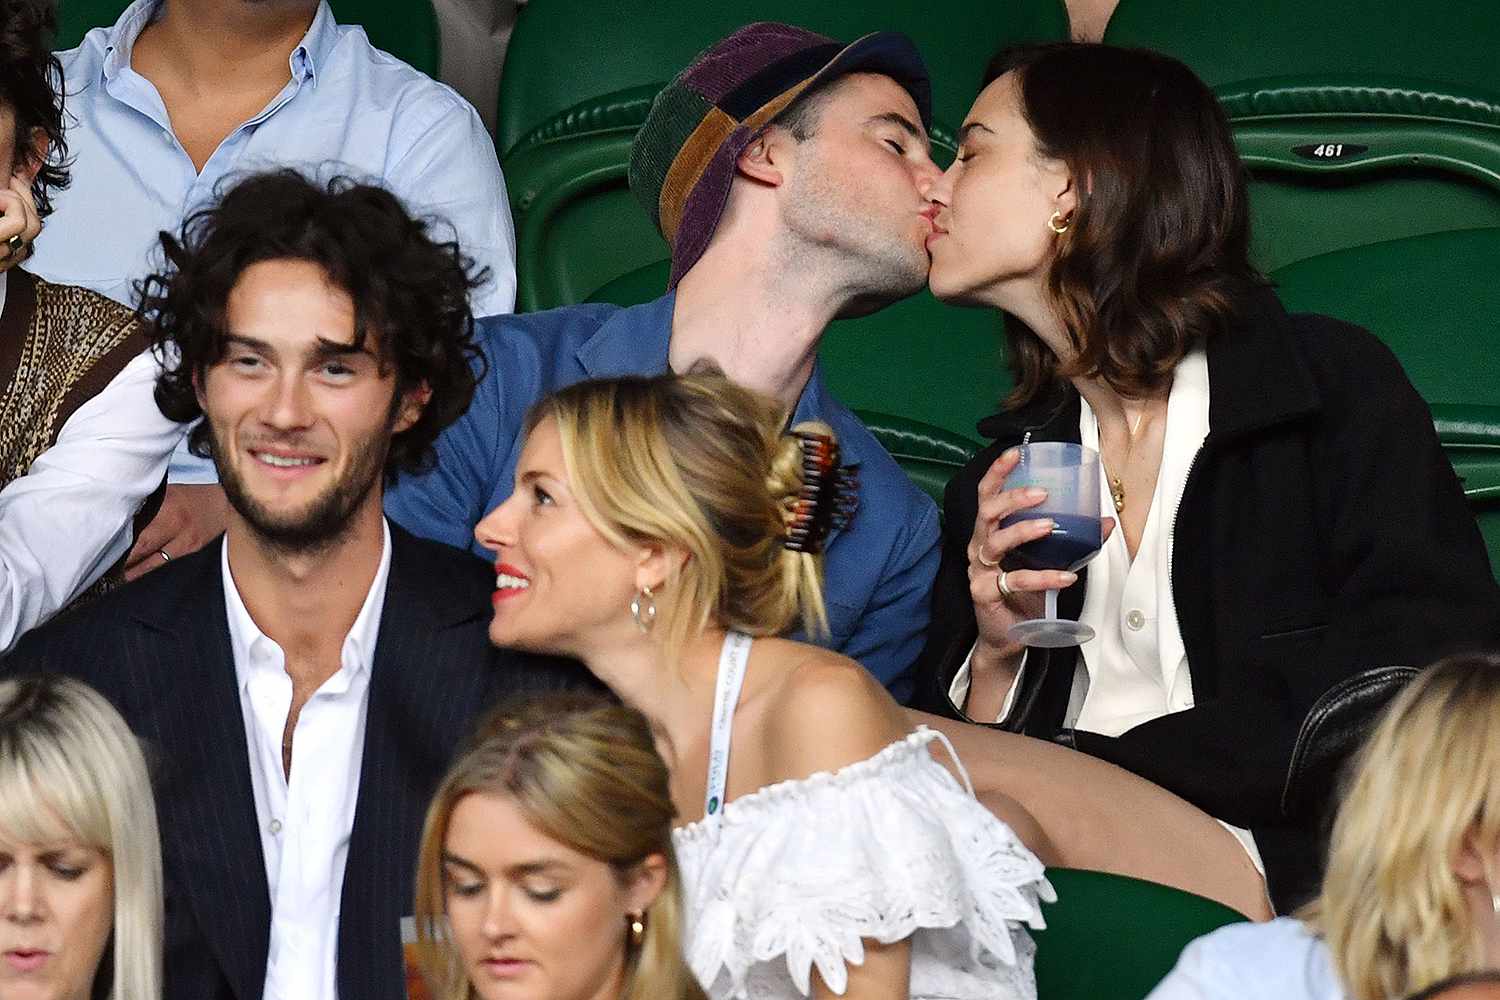 Tom Sturridge and Alexa Chung Kiss While Sitting By His Ex Sienna Miller at Wimbledon